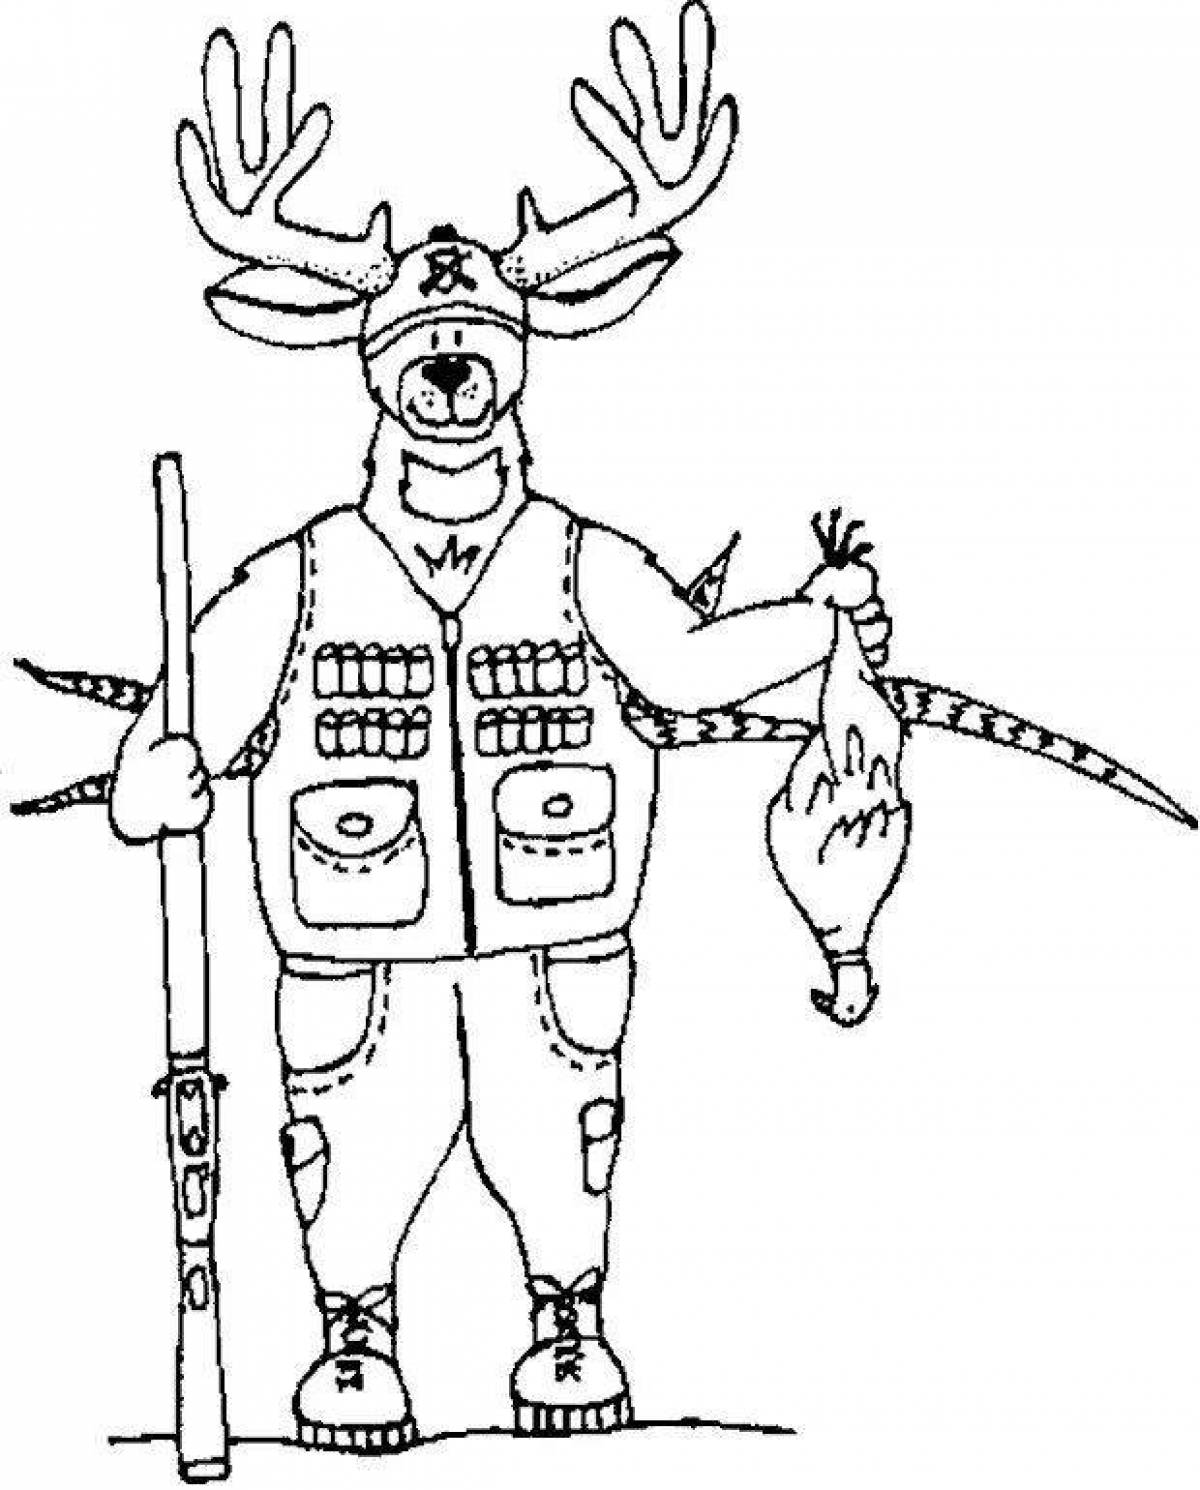 Focused hunter coloring page